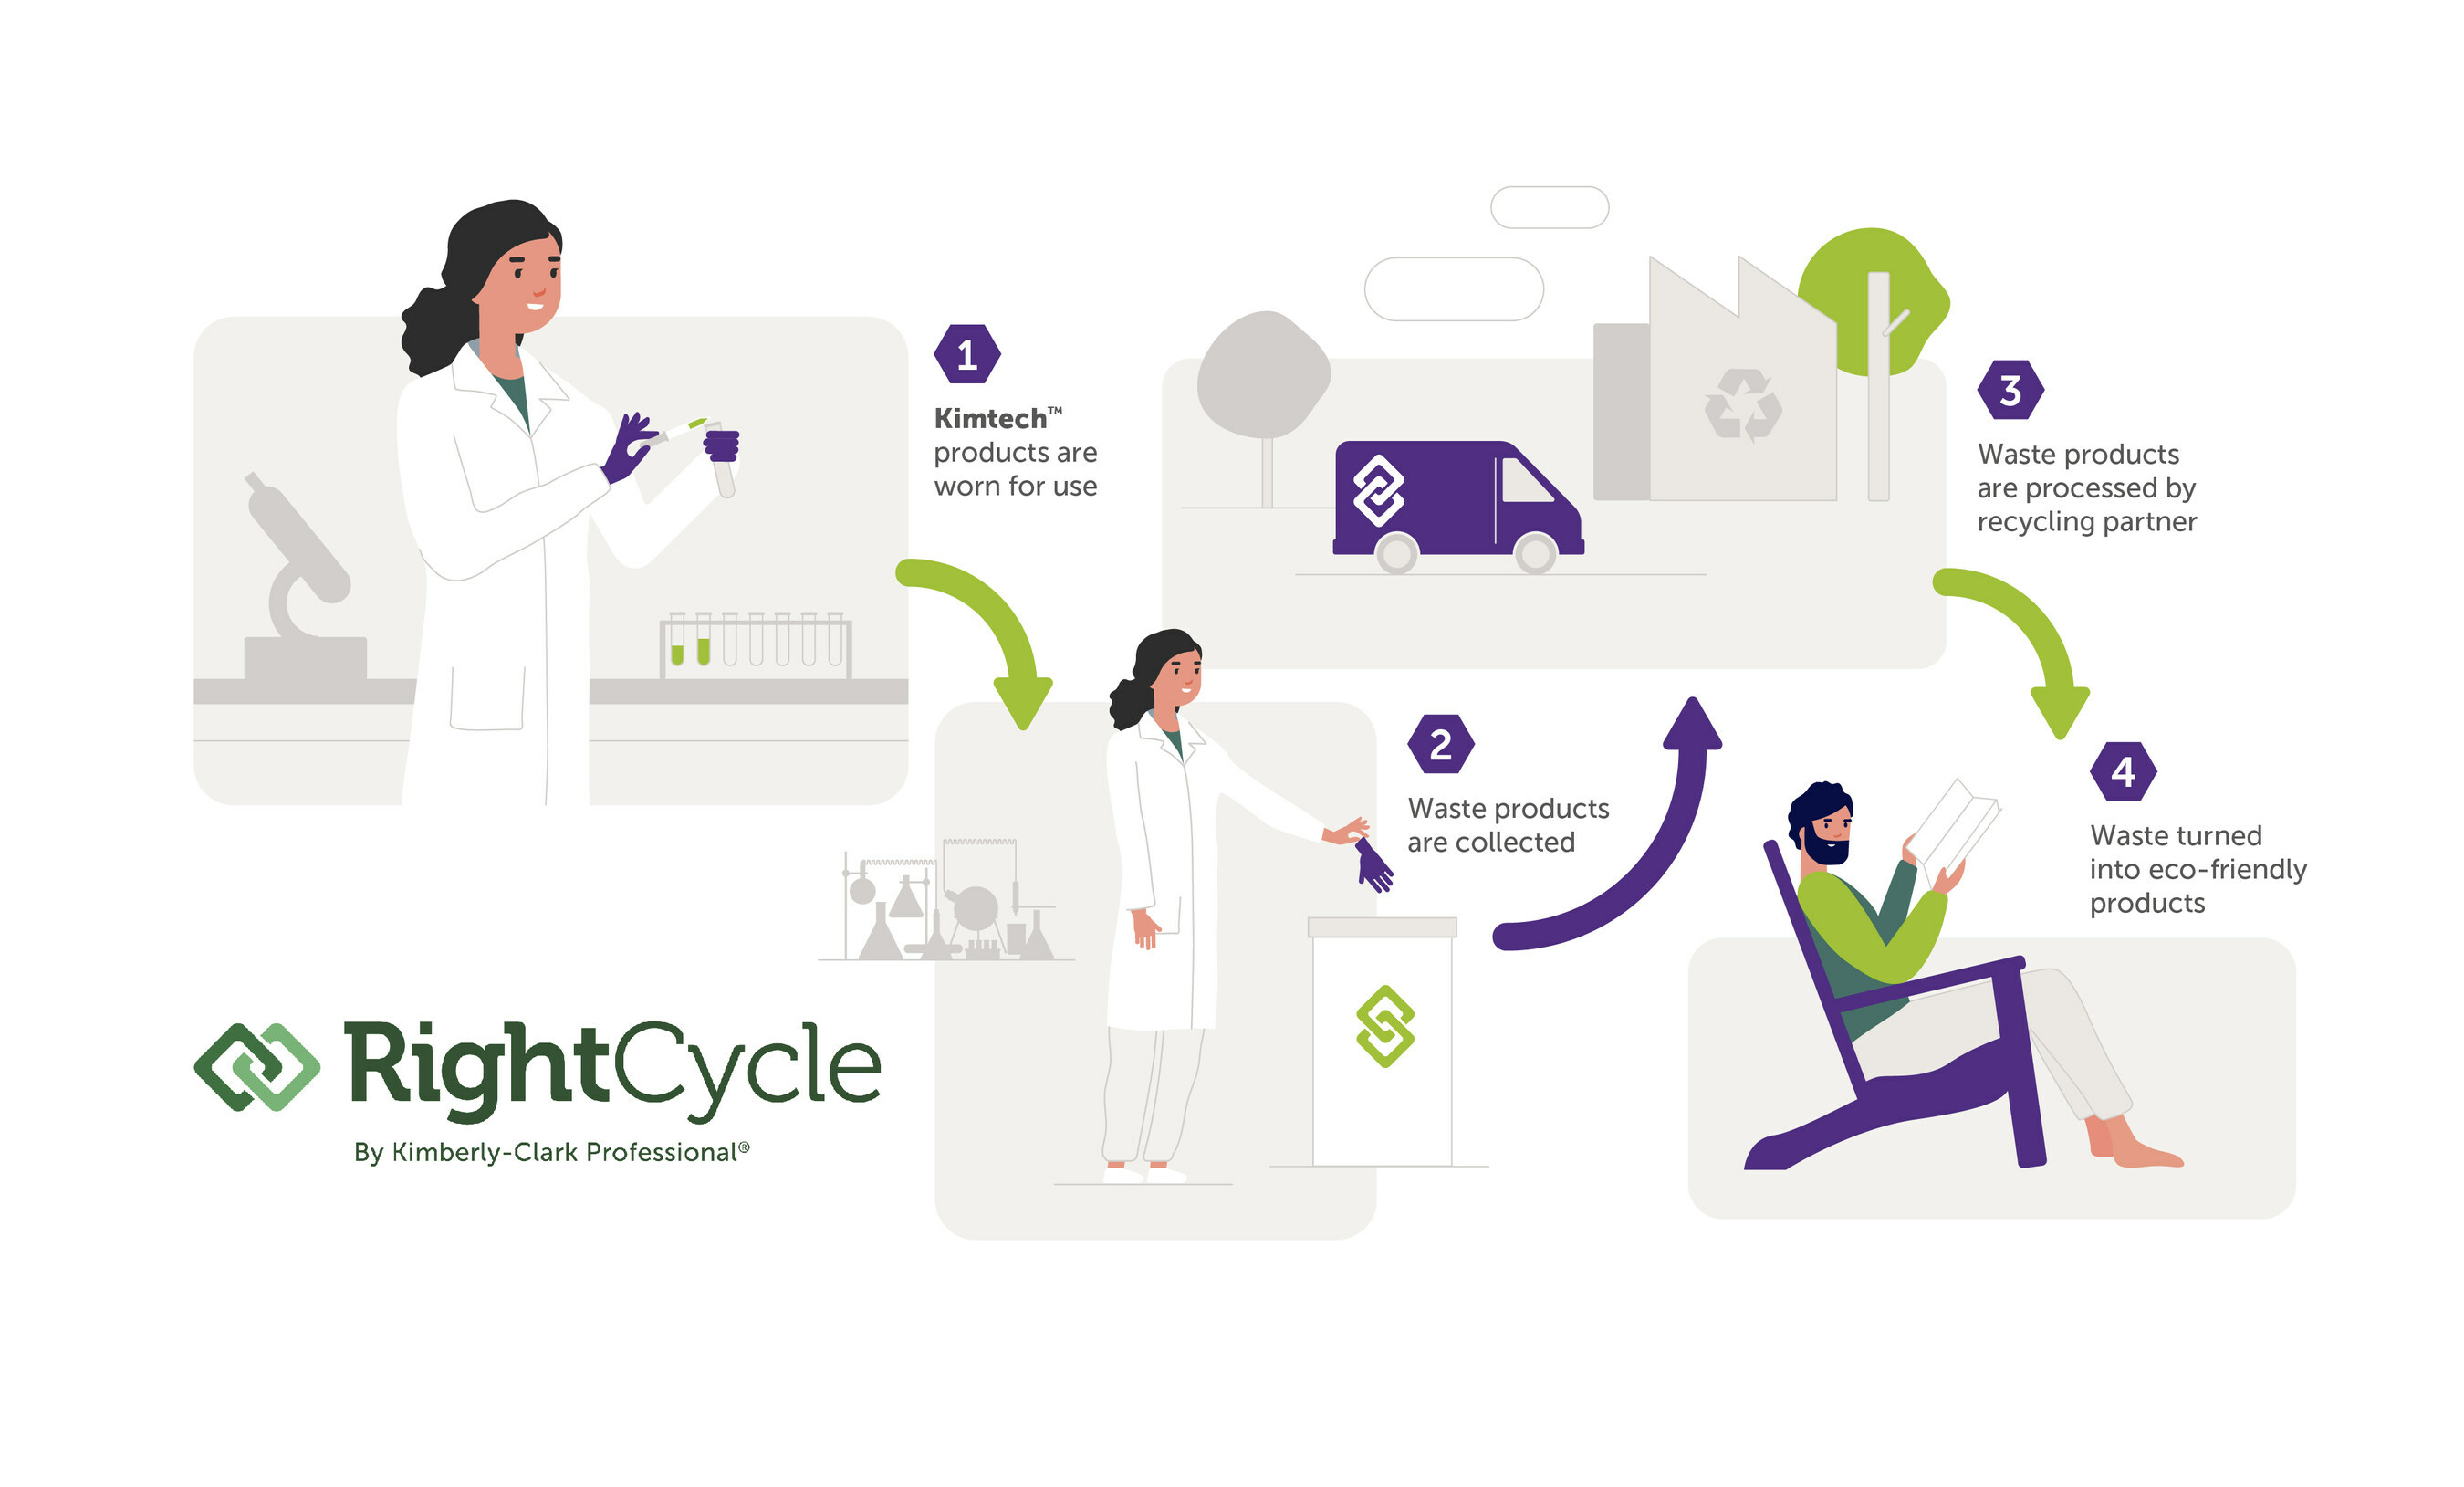 Kimberly-Clark Professional expands the RightCycle programme to the Netherlands and Switzerland